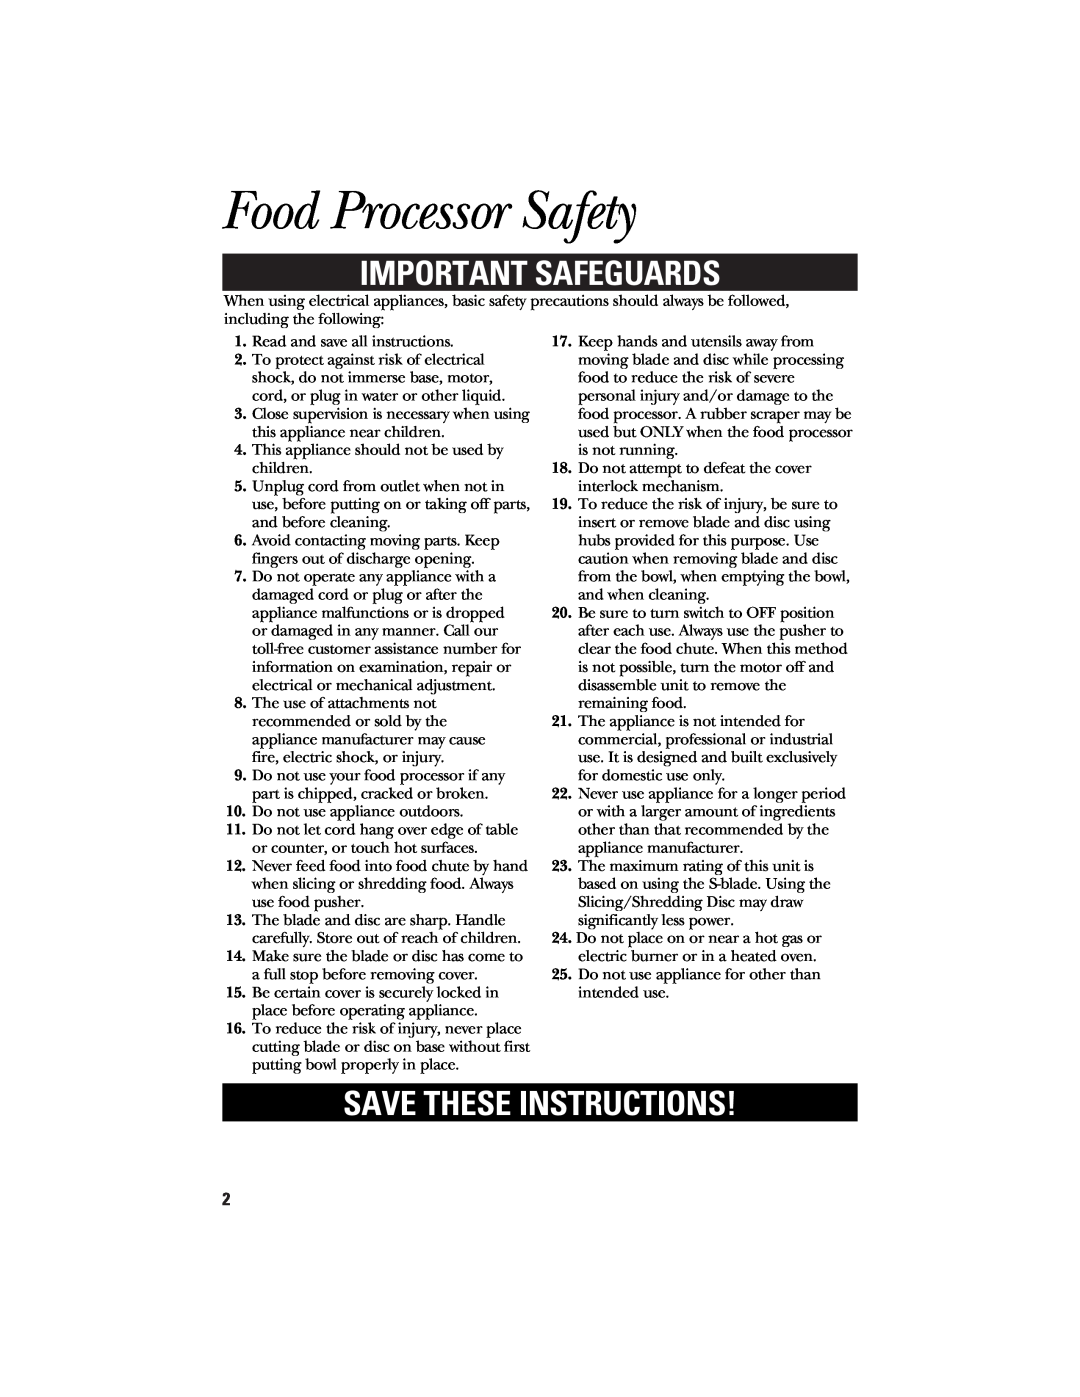 GE 840074400 manual Food Processor Safety, Important Safeguards, Save These Instructions 